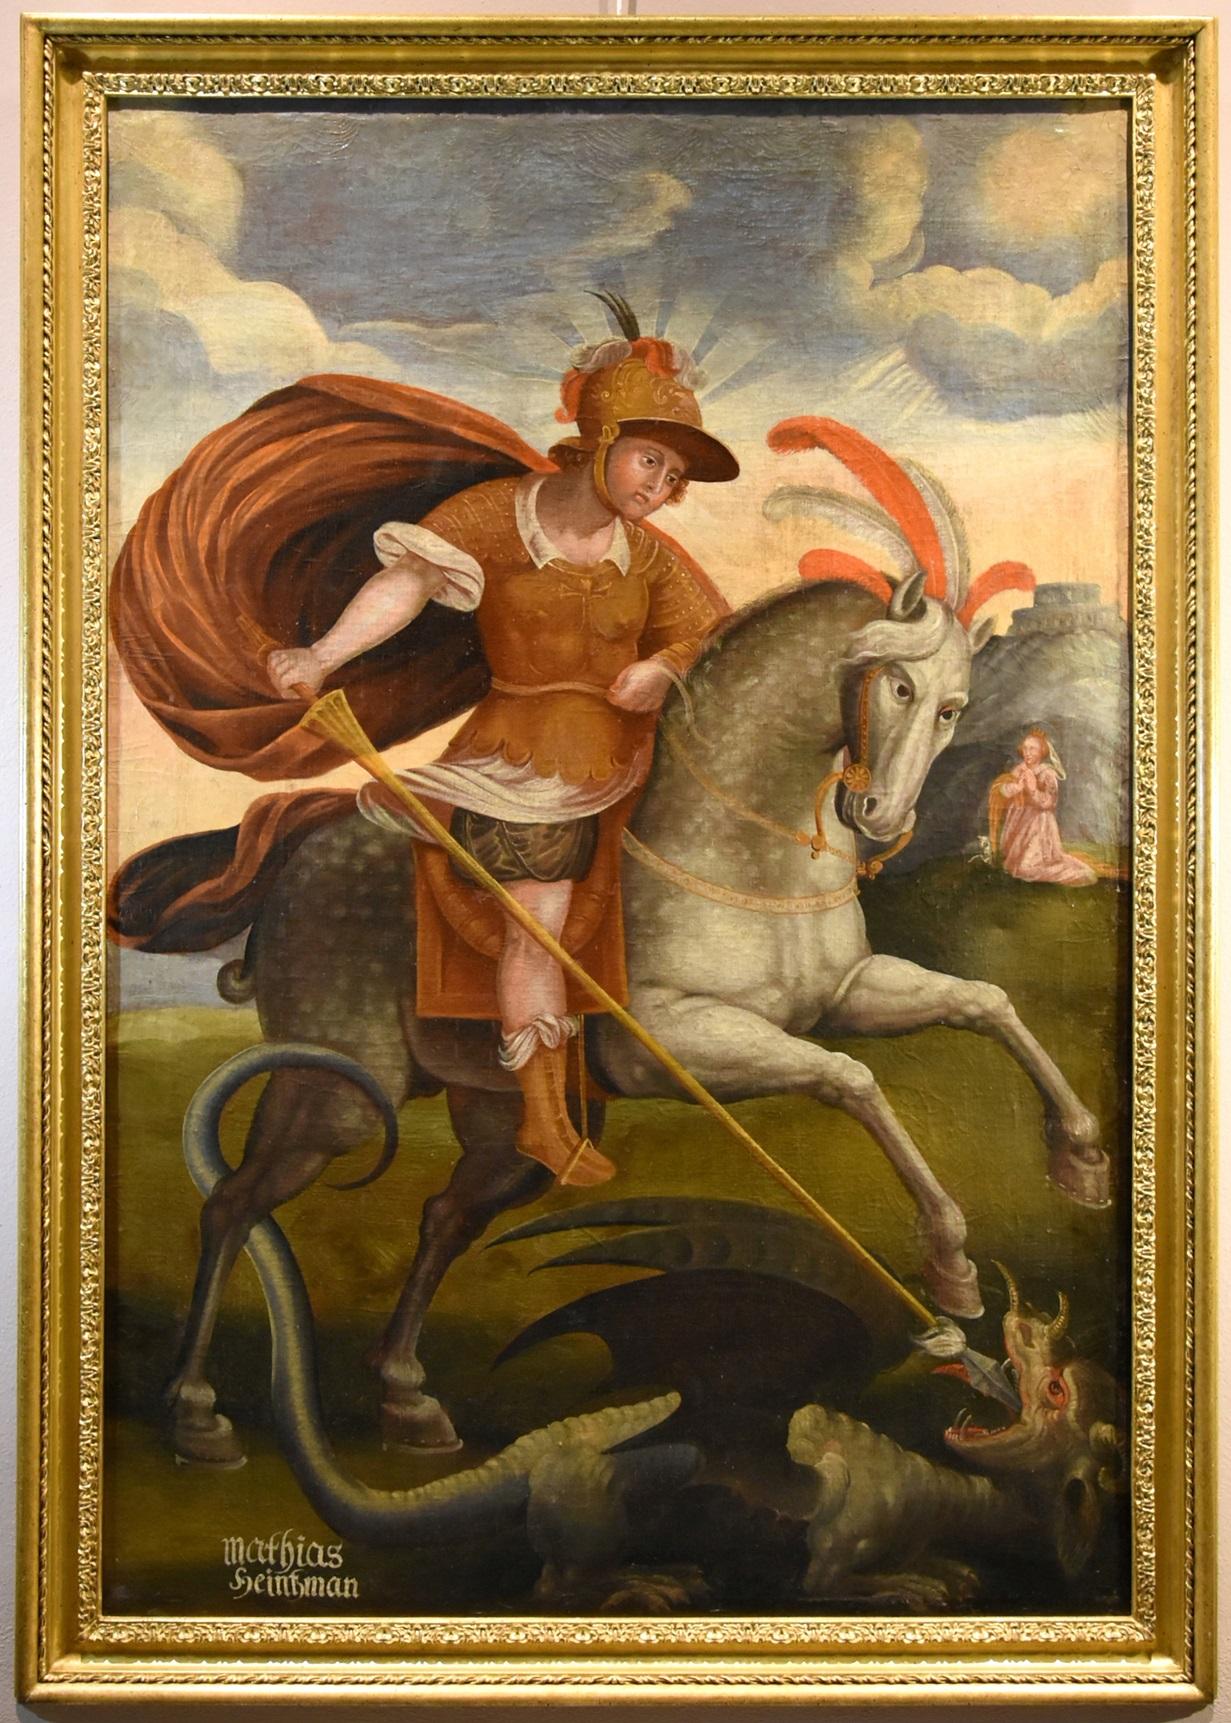 Saint George Dragon Alpine Painter 17th Century Paint Oil on canvas Old master - Painting by Unknown